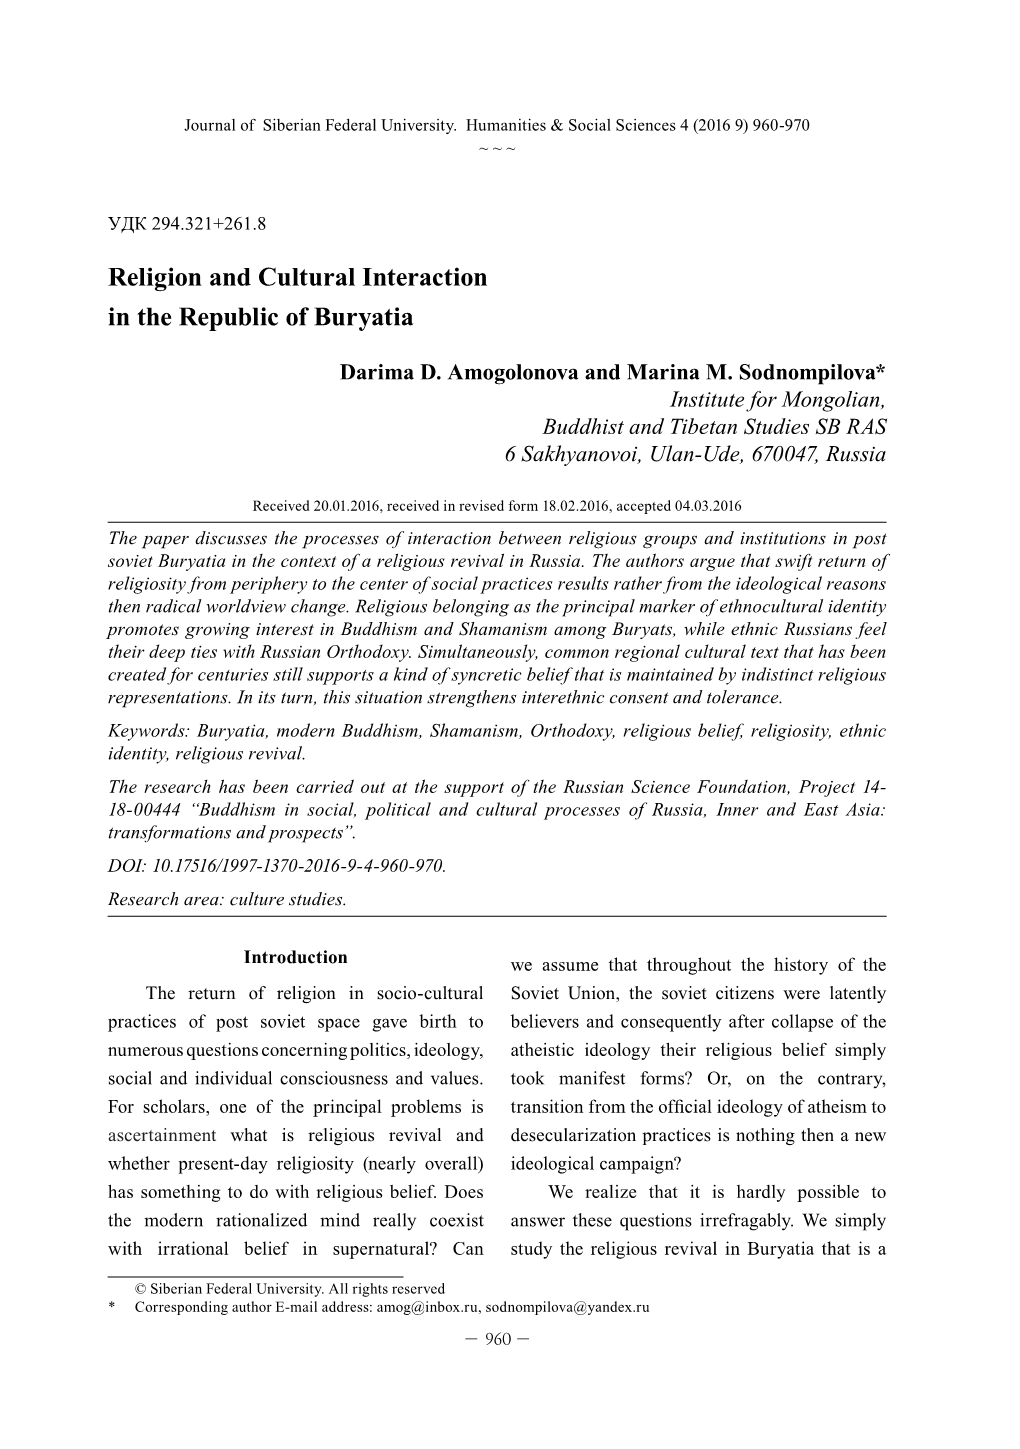 Religion and Cultural Interaction in the Republic of Buryatia